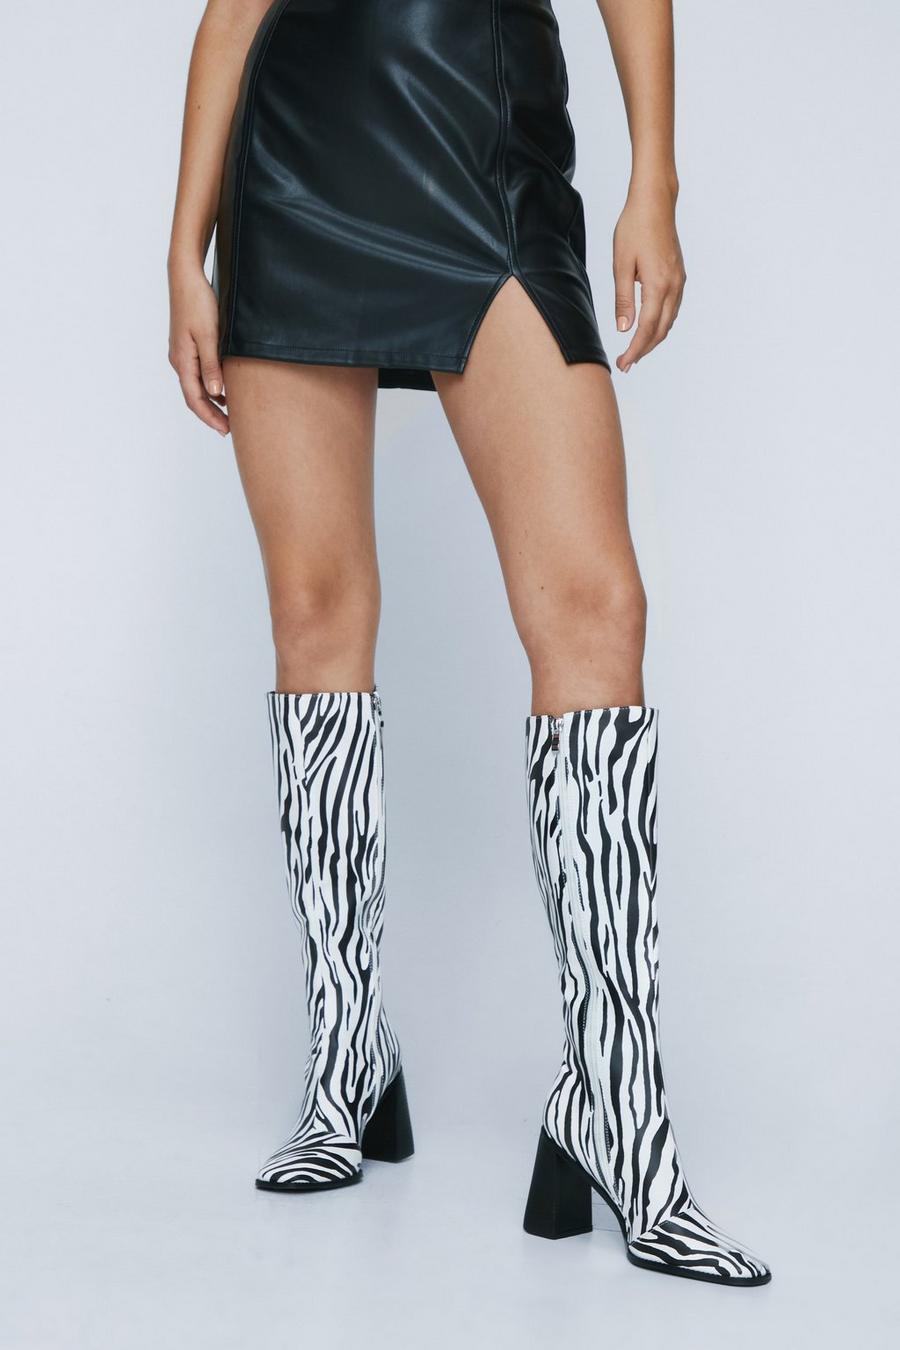 Knee High Boots | Over the Knee Boots | Nasty Gal